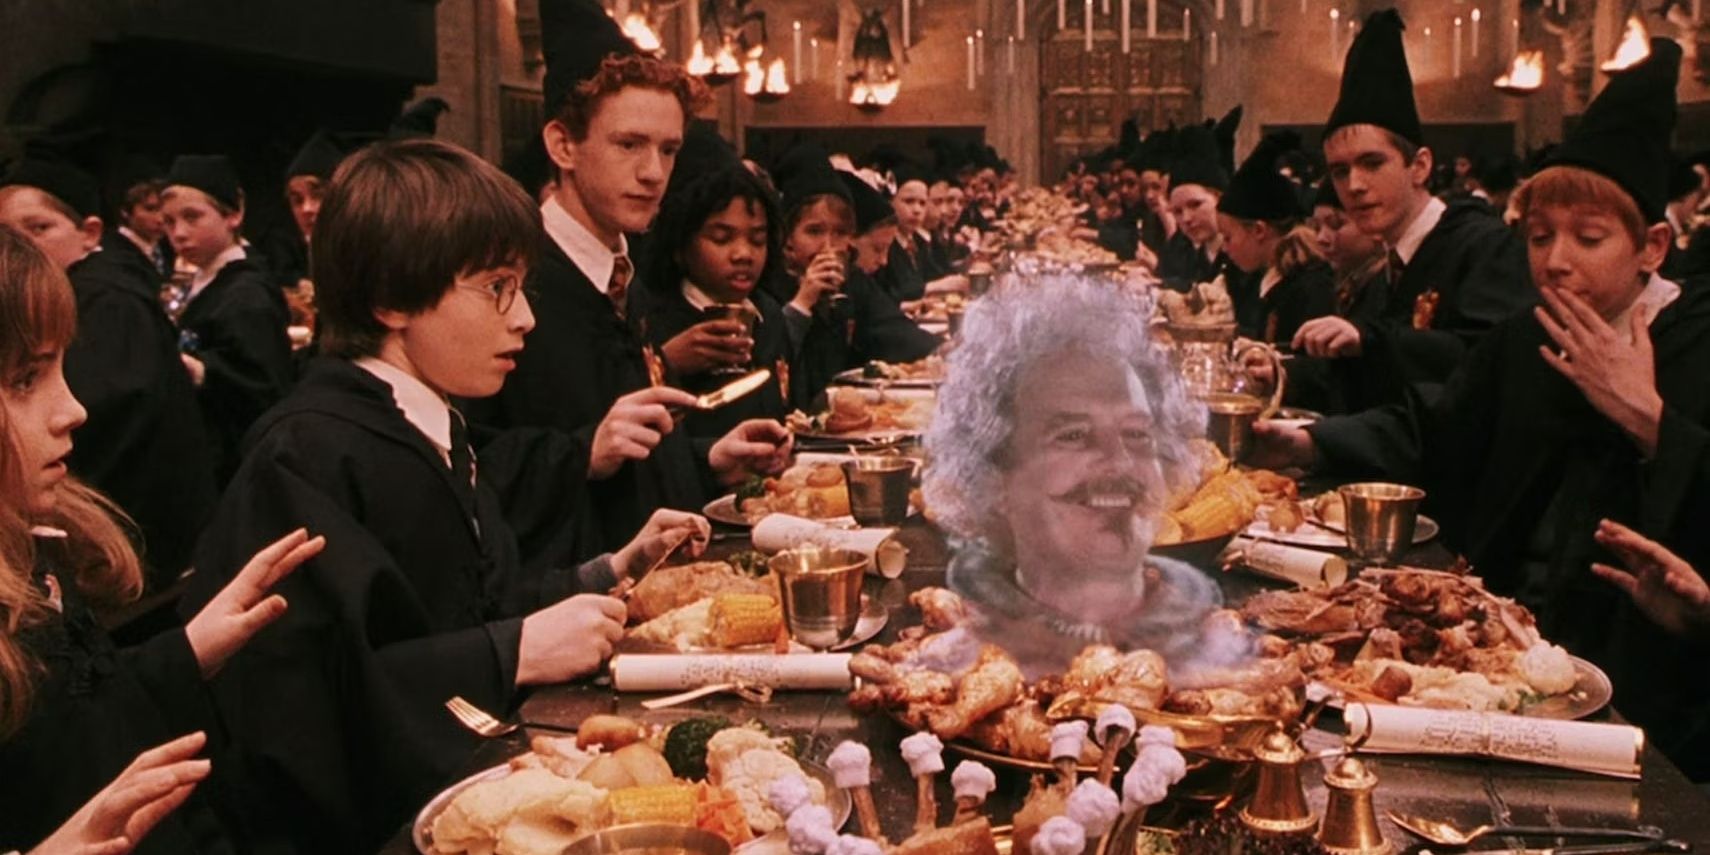 The Feast at Hogwarts in Harry Potter